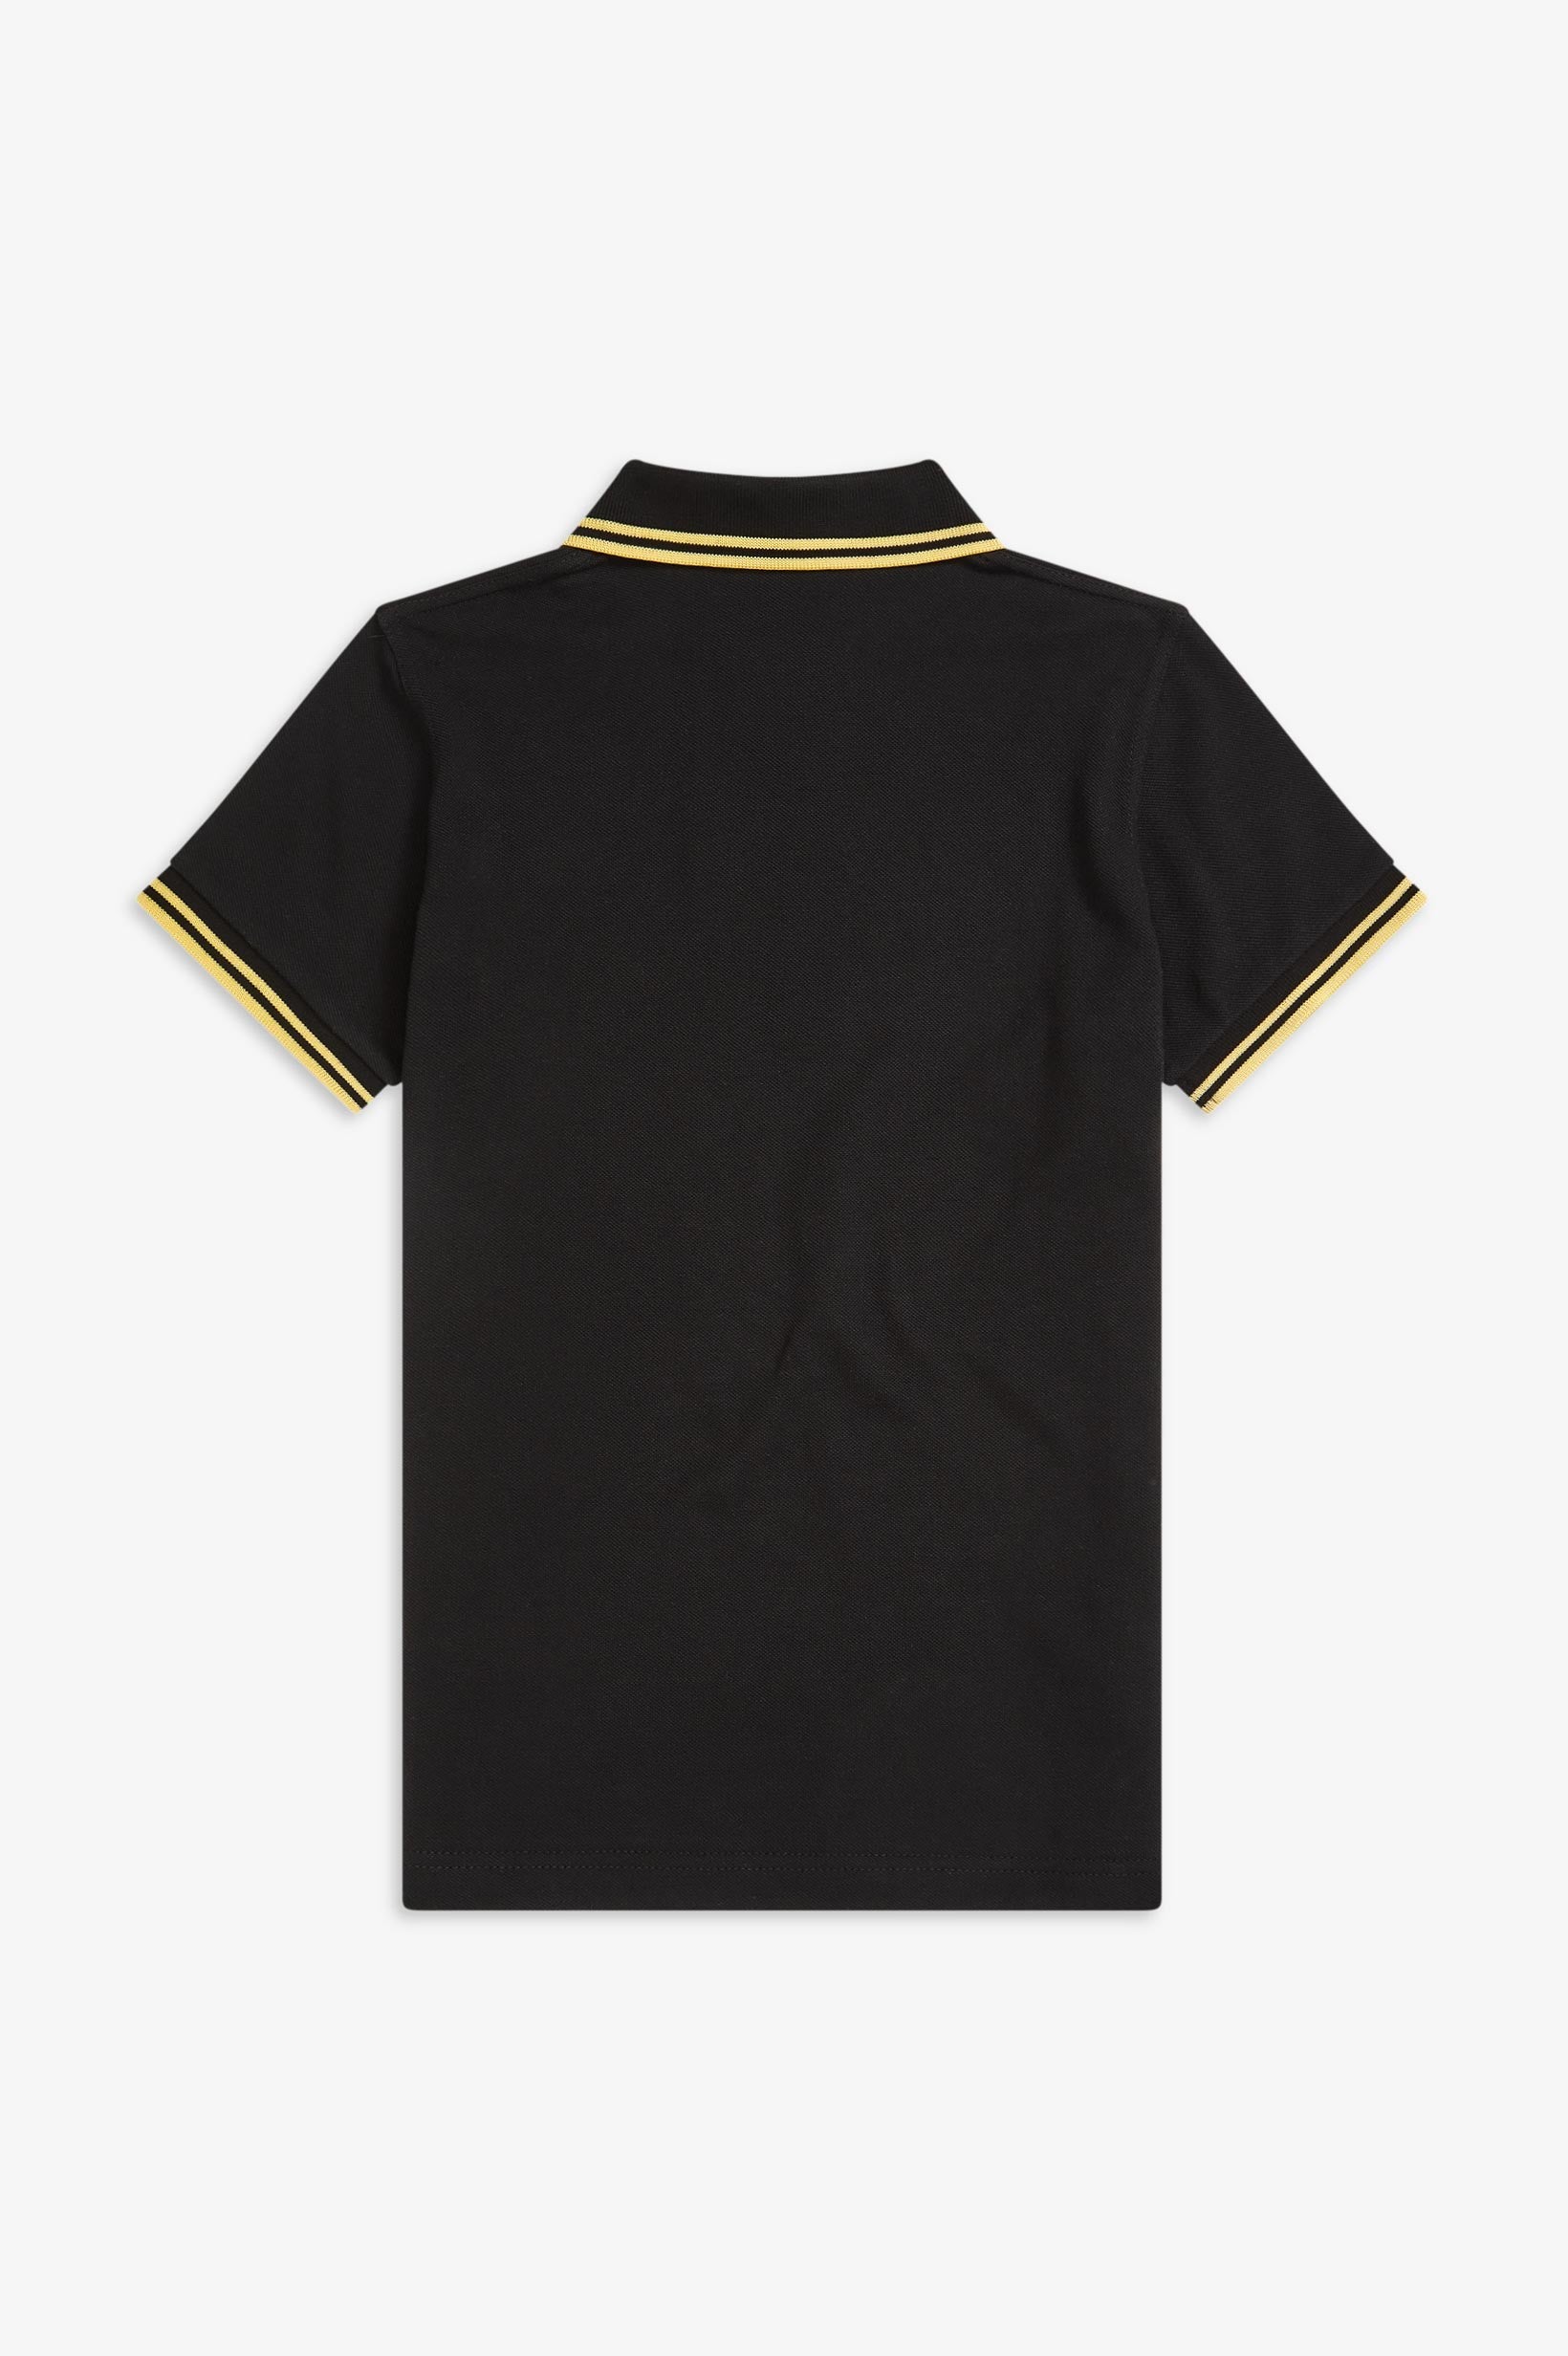 LADIES MADE IN ENGLAND FRED PERRY SHIRT (BLACK/CHAMPAGNE)